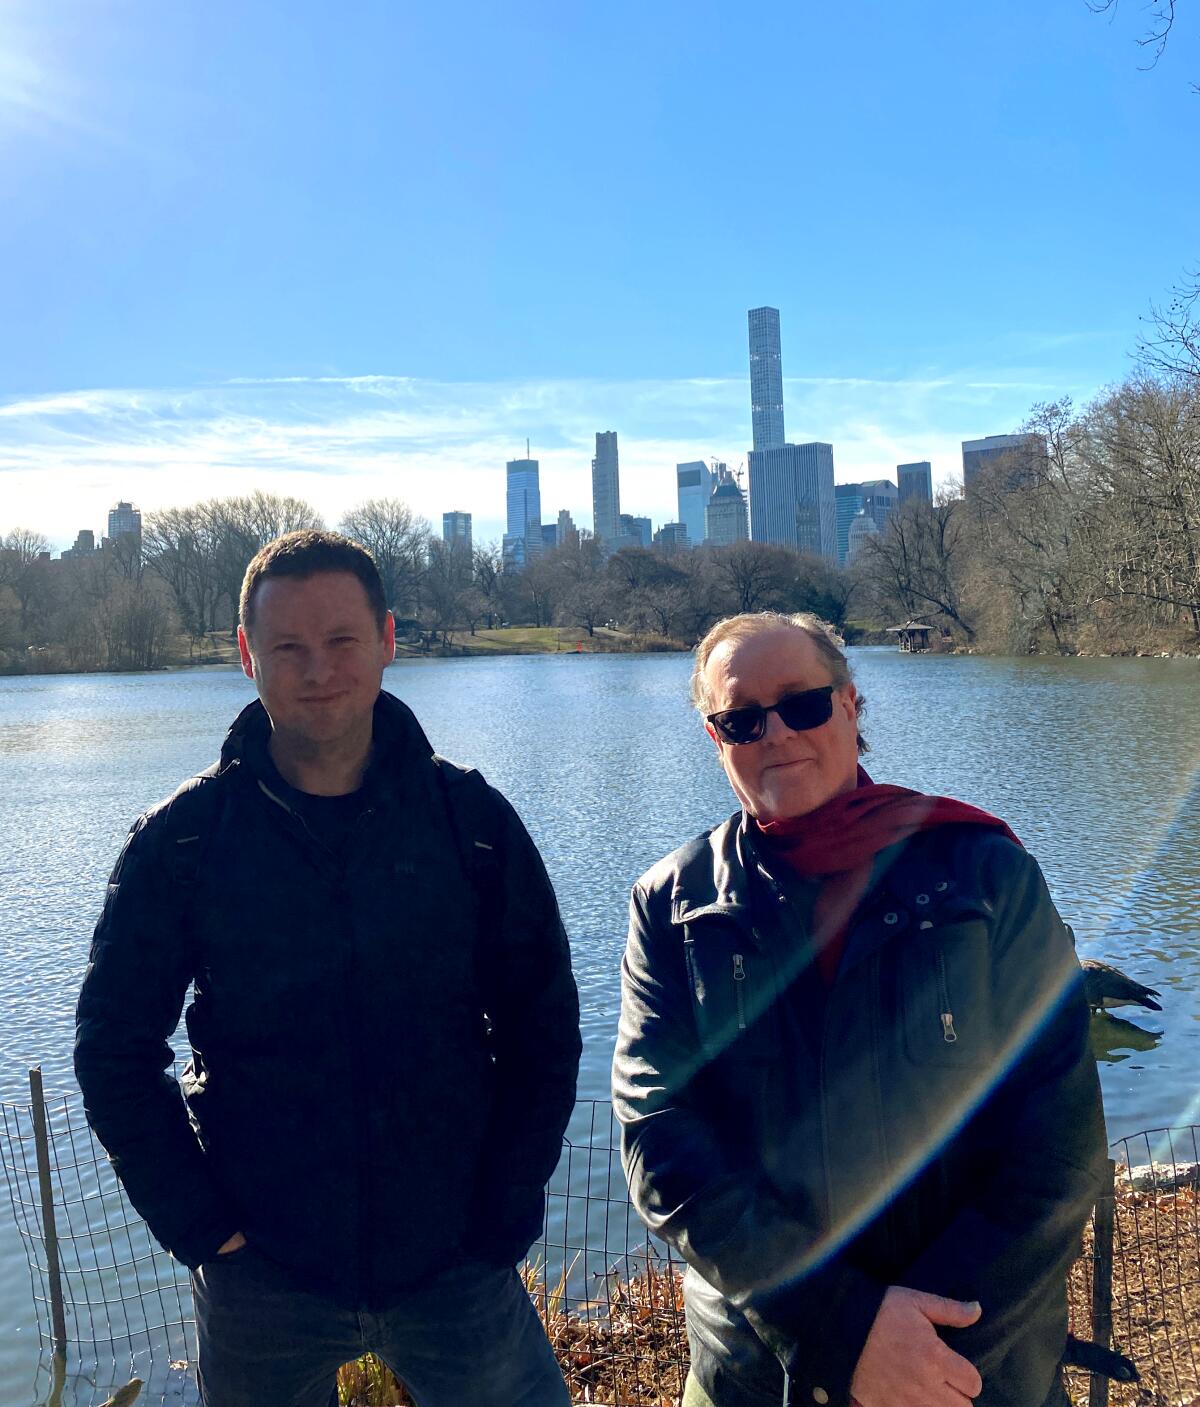 Two men pose in front of a lake and the New York skyline.